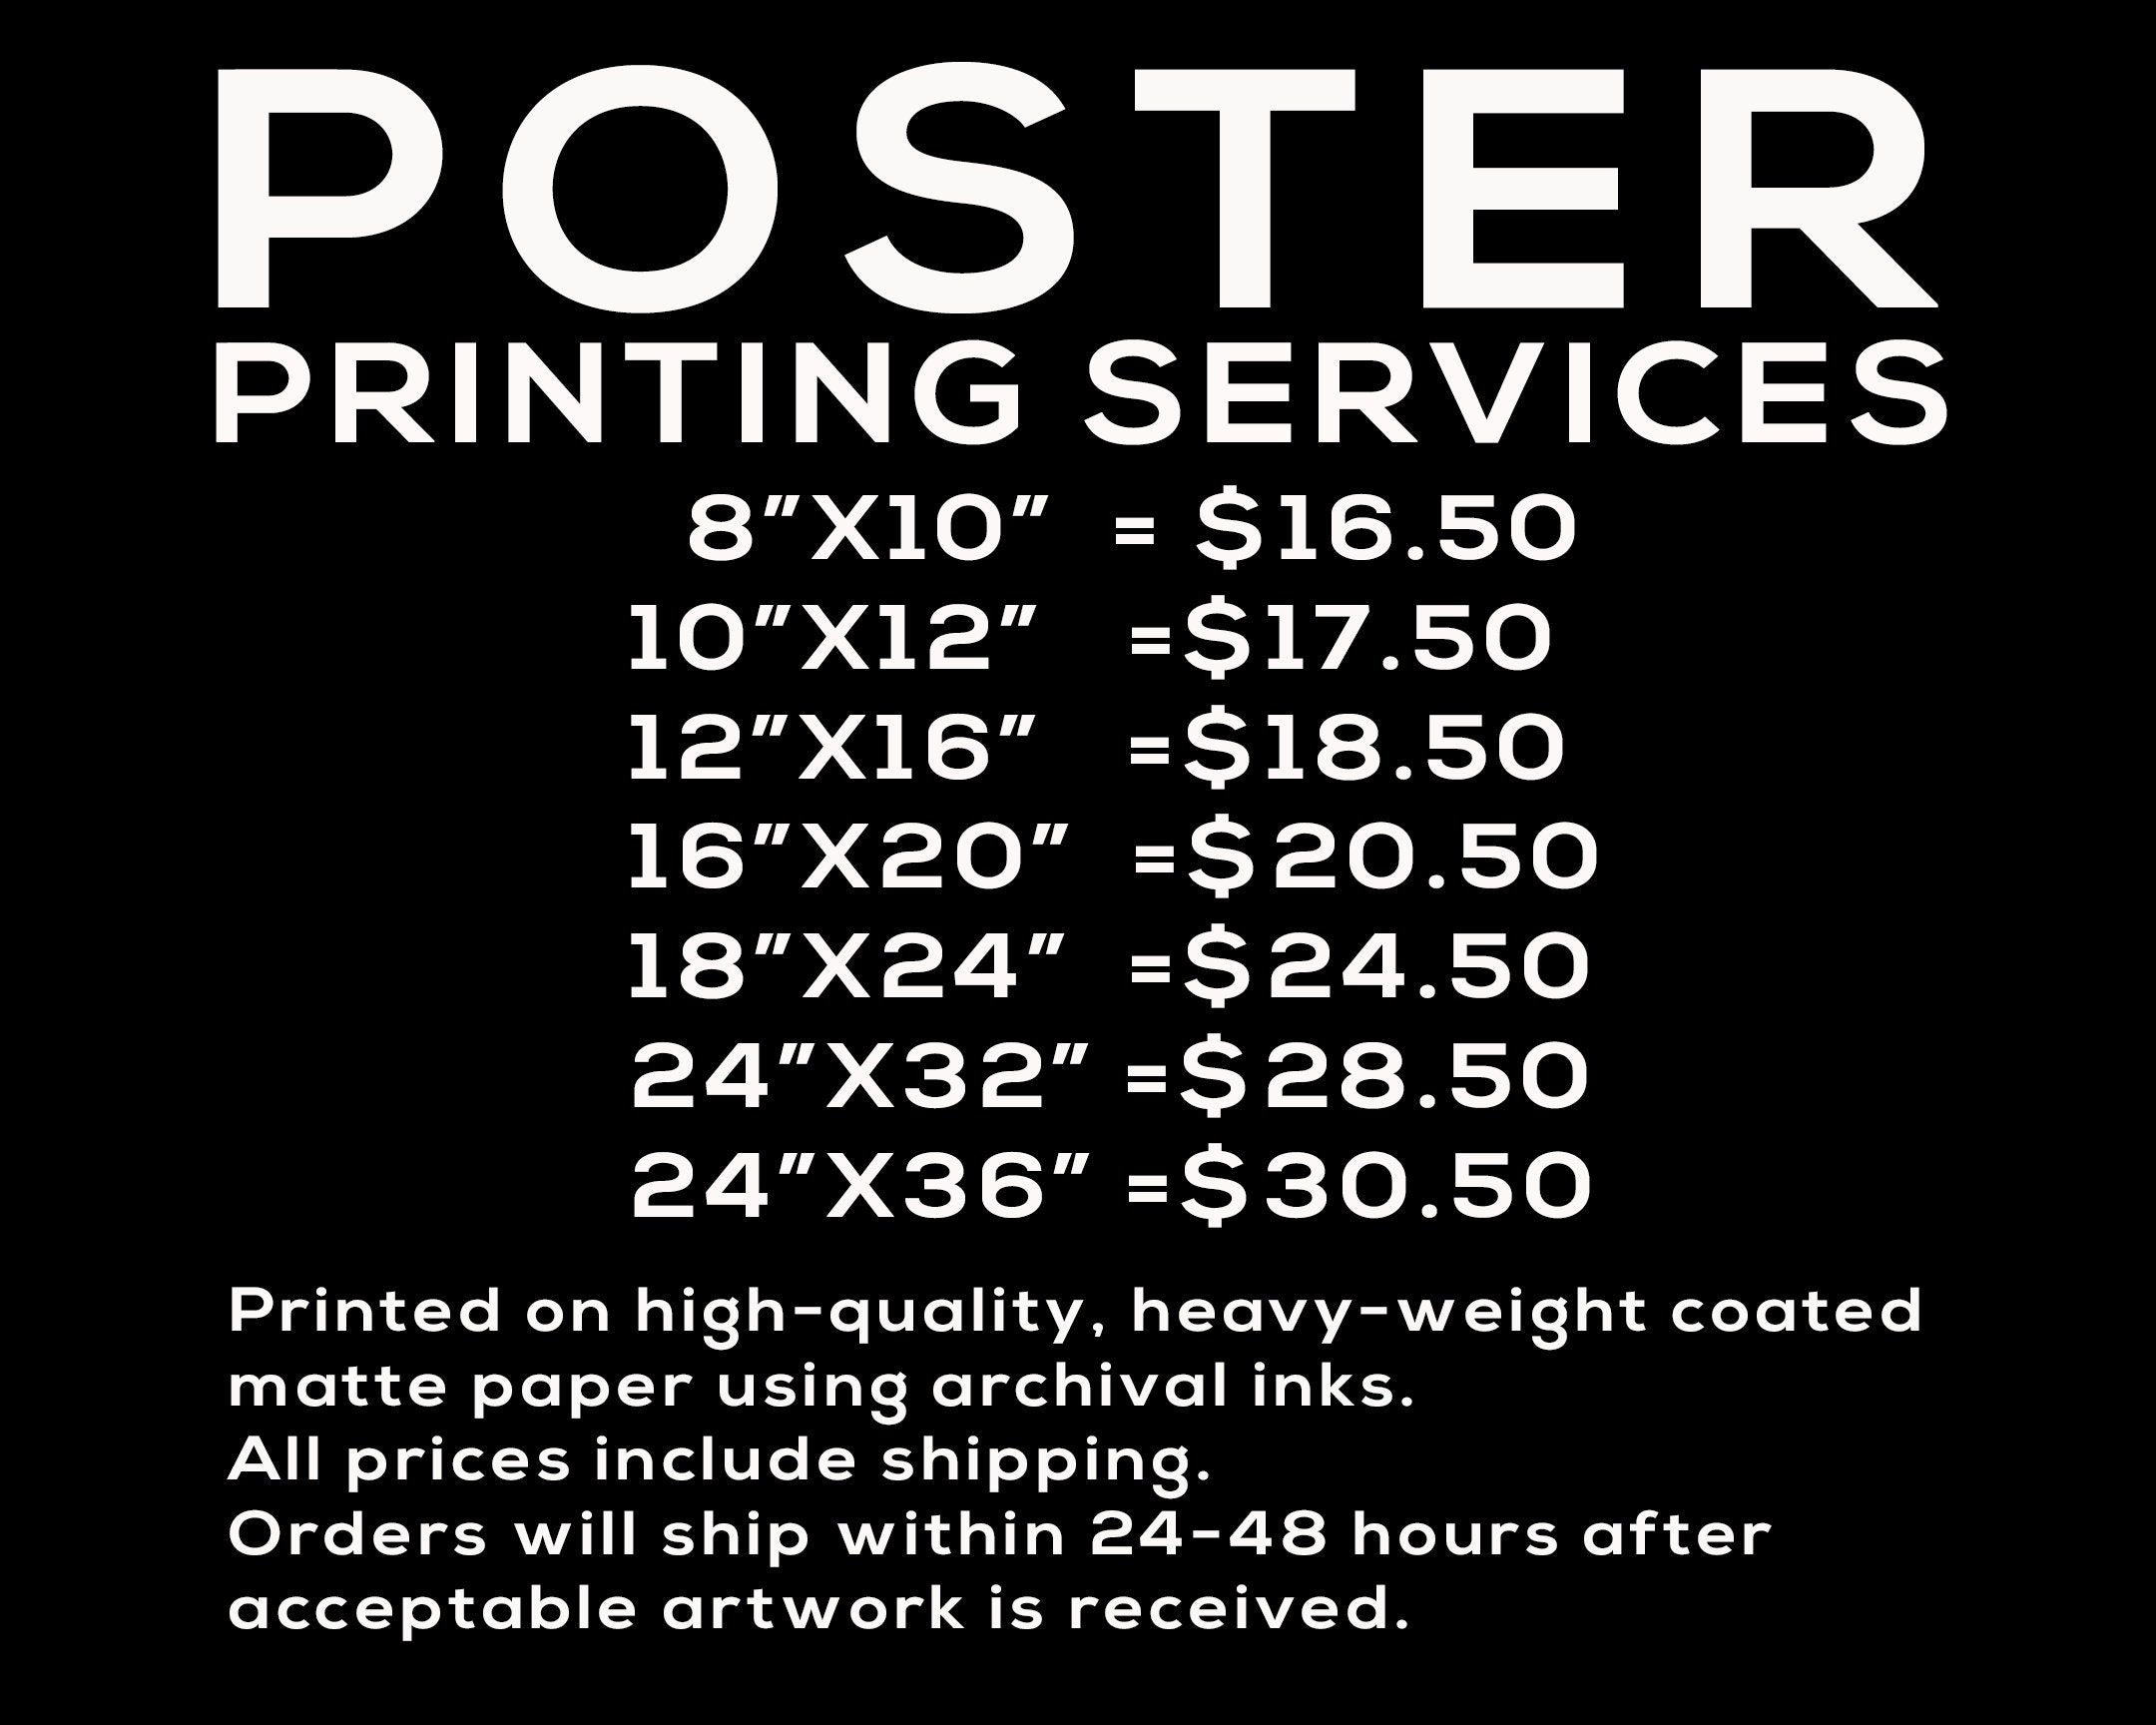 Poster Custom Printing Services Fulfillment Services -